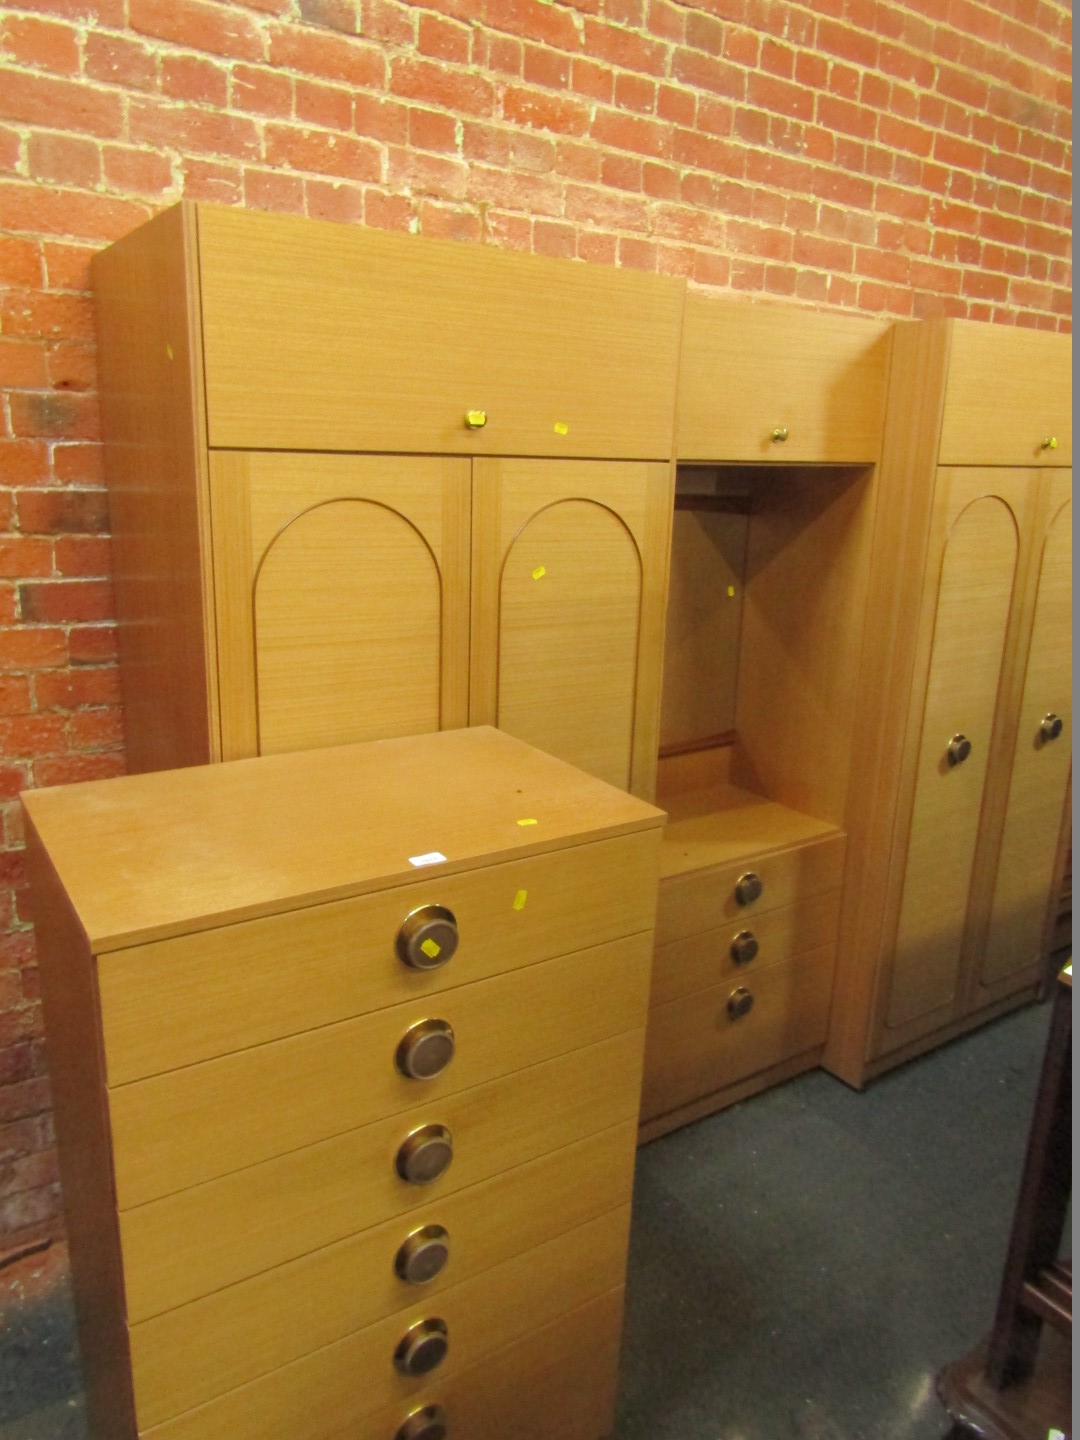 A Stateroom bedroom suite, comprising two drawer wardrobe (x 2), a six drawer chest, and a display